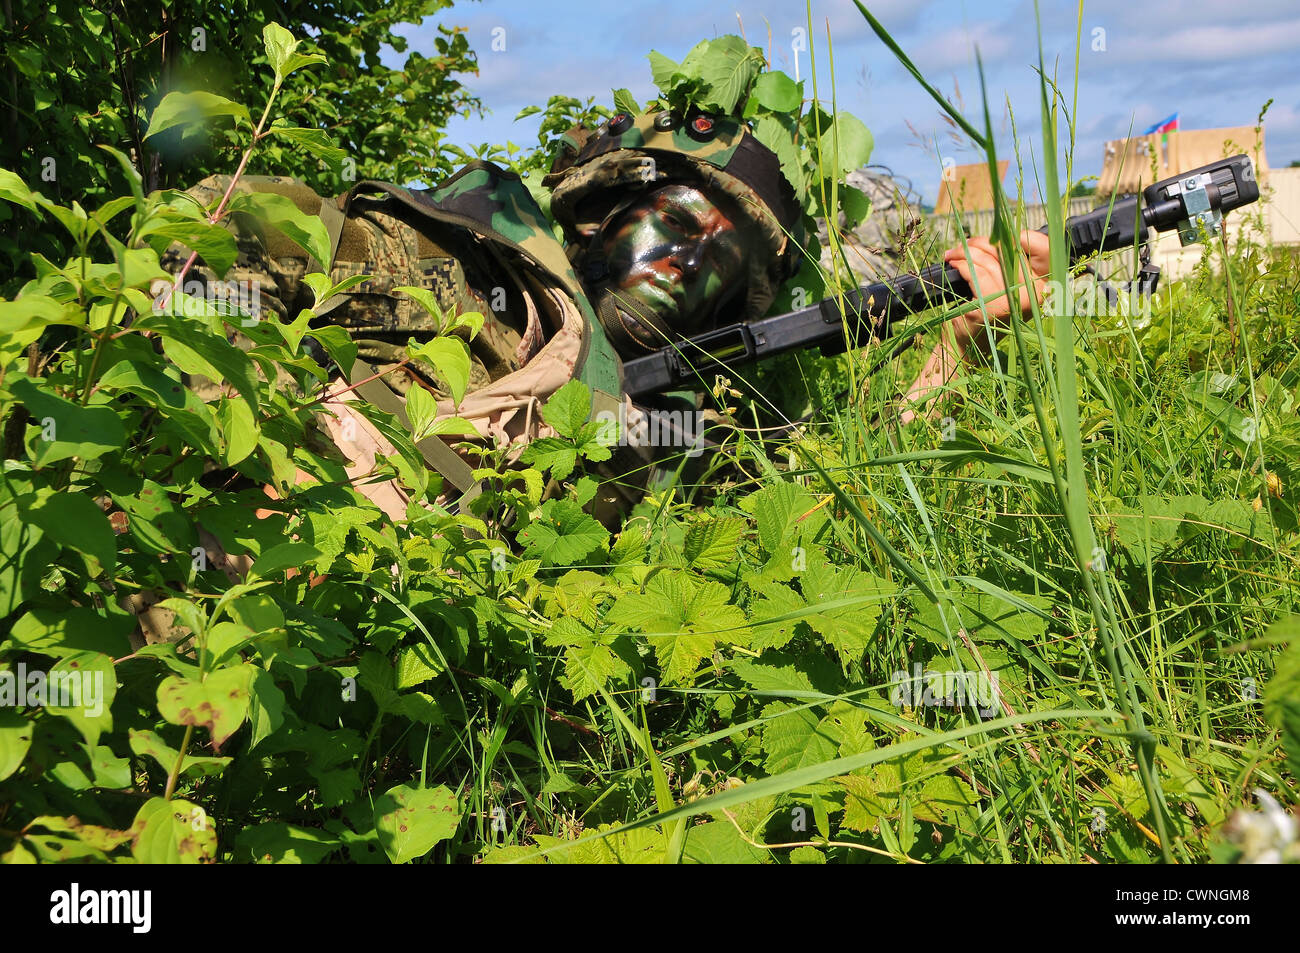 A Croatian Ground Forces soldier with painted black face changes his magazine during a field training exercise as part of Immediate Response 2012, a US Army/Europe-led joint field training exercise June 6, 2012 in Slunj, Croatia. Stock Photo